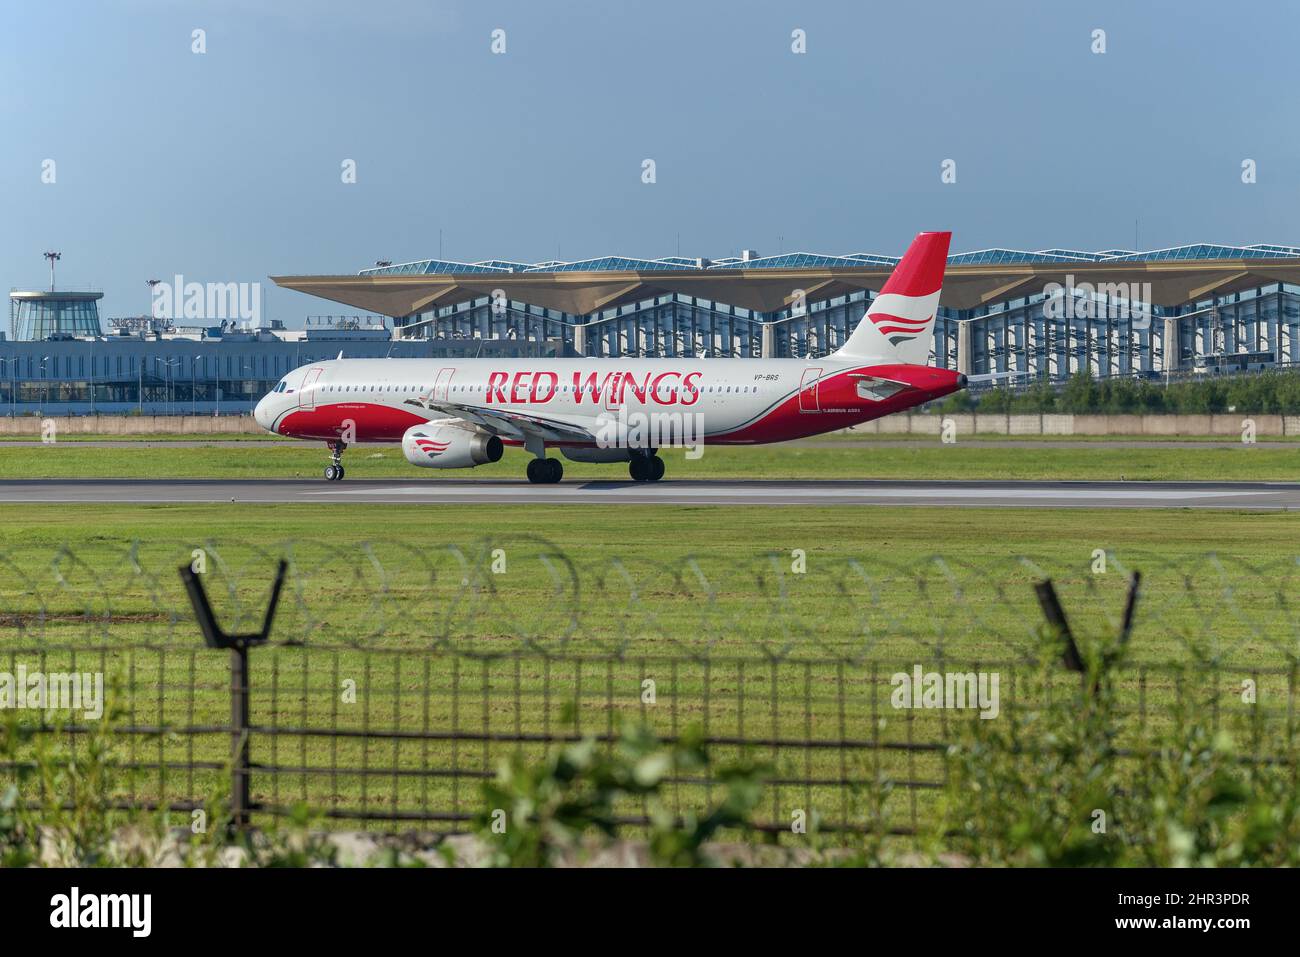 SAINT PETERSBURG, RUSSIA - AUGUST 08, 2020: RED WINGS Airbus A321-200 (VP-BRS) aircraft on the taxiway of Pulkovo Airport Stock Photo